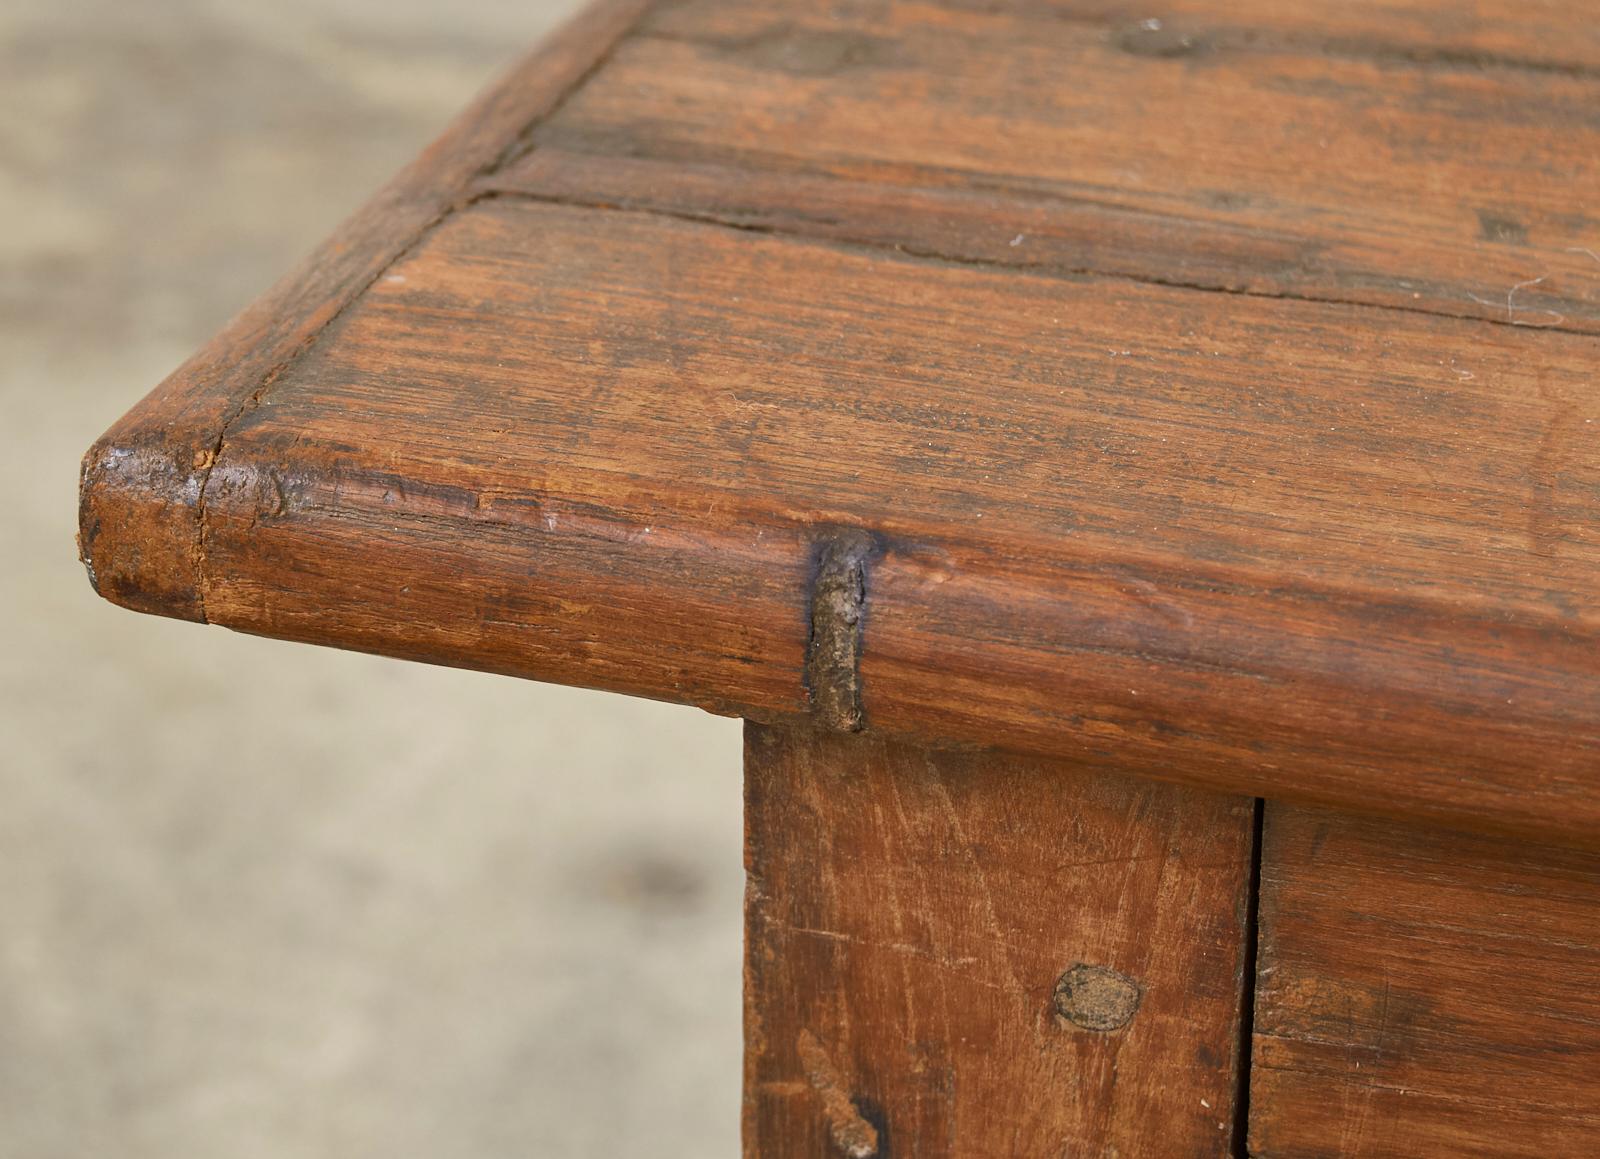 19th Century British Colonial Hardwood Low Table or Bench 10